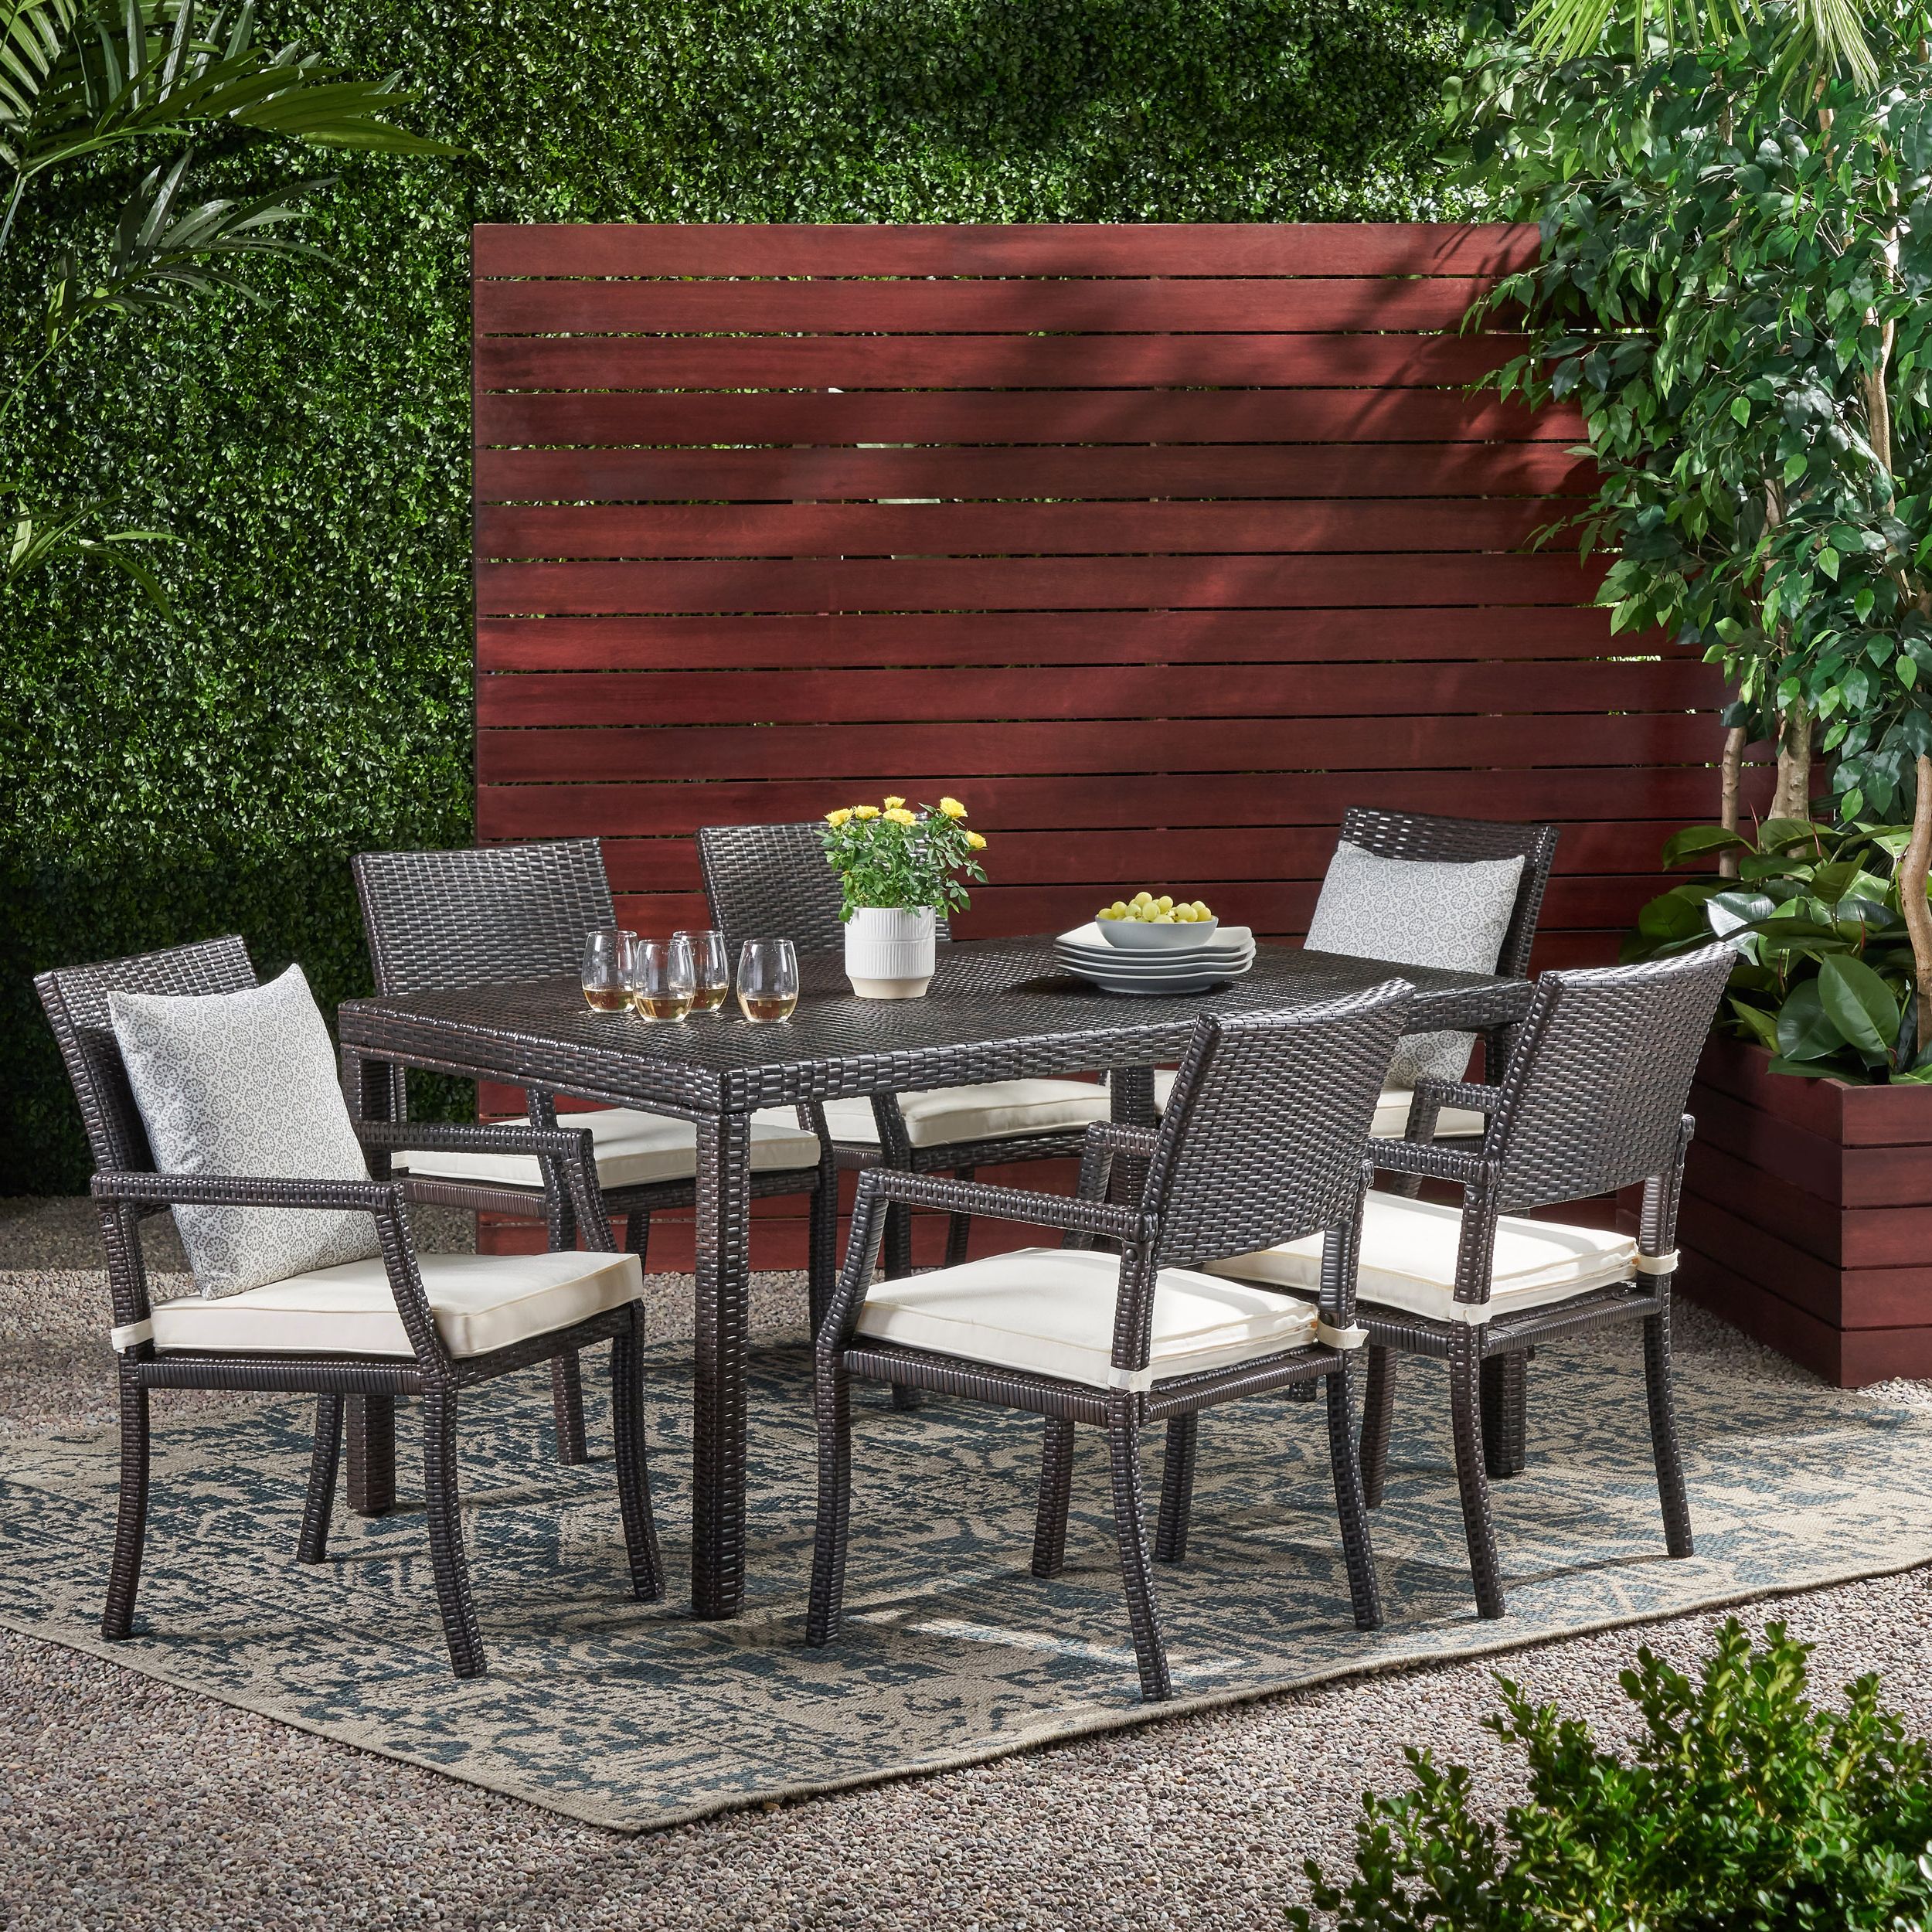 Best And Newest Large Rectangular Patio Dining Sets With Regard To Outdoor 7 Piece Wicker Rectangular Dining Set,multibrown,white (View 2 of 15)